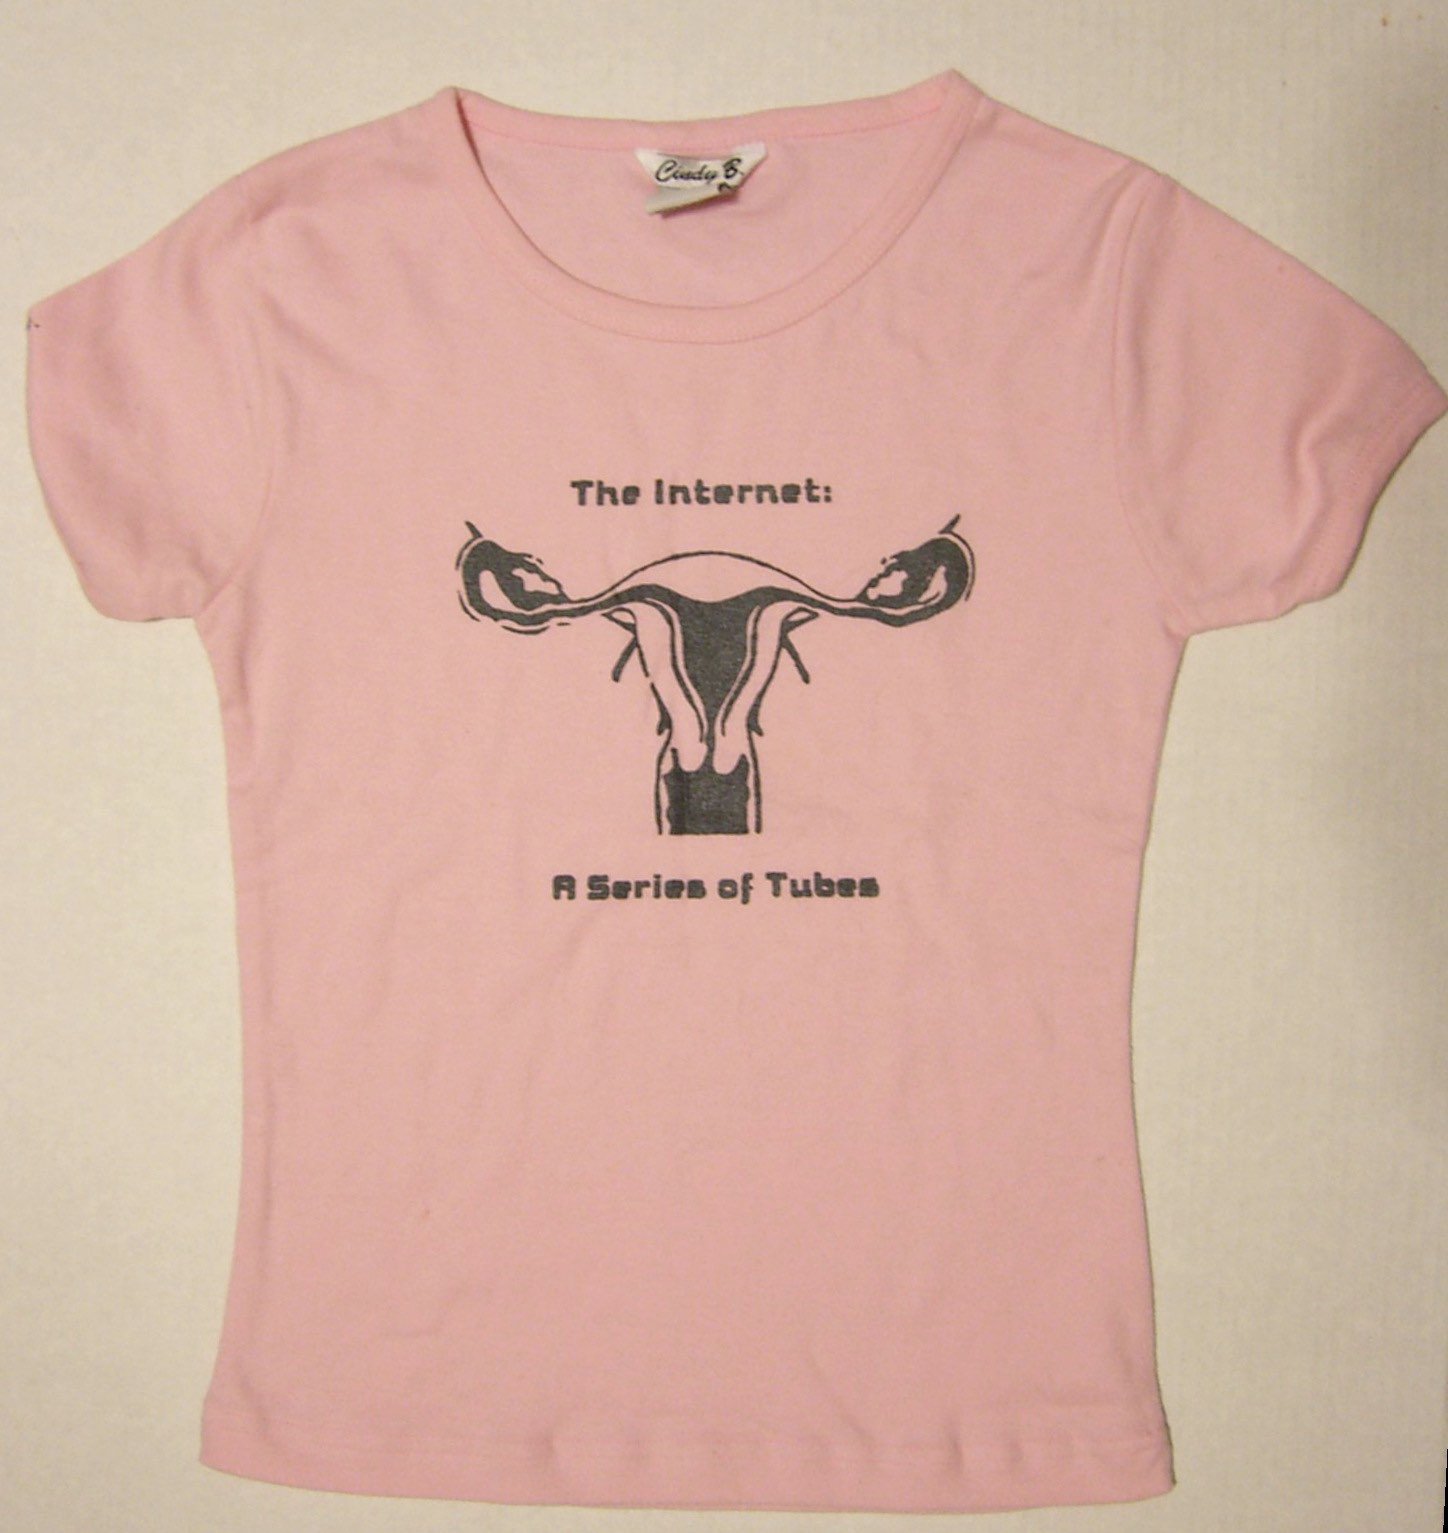 a pink t-shirt with an image of a uterus surrounded by the text “The Internet: A Series of Tubes”